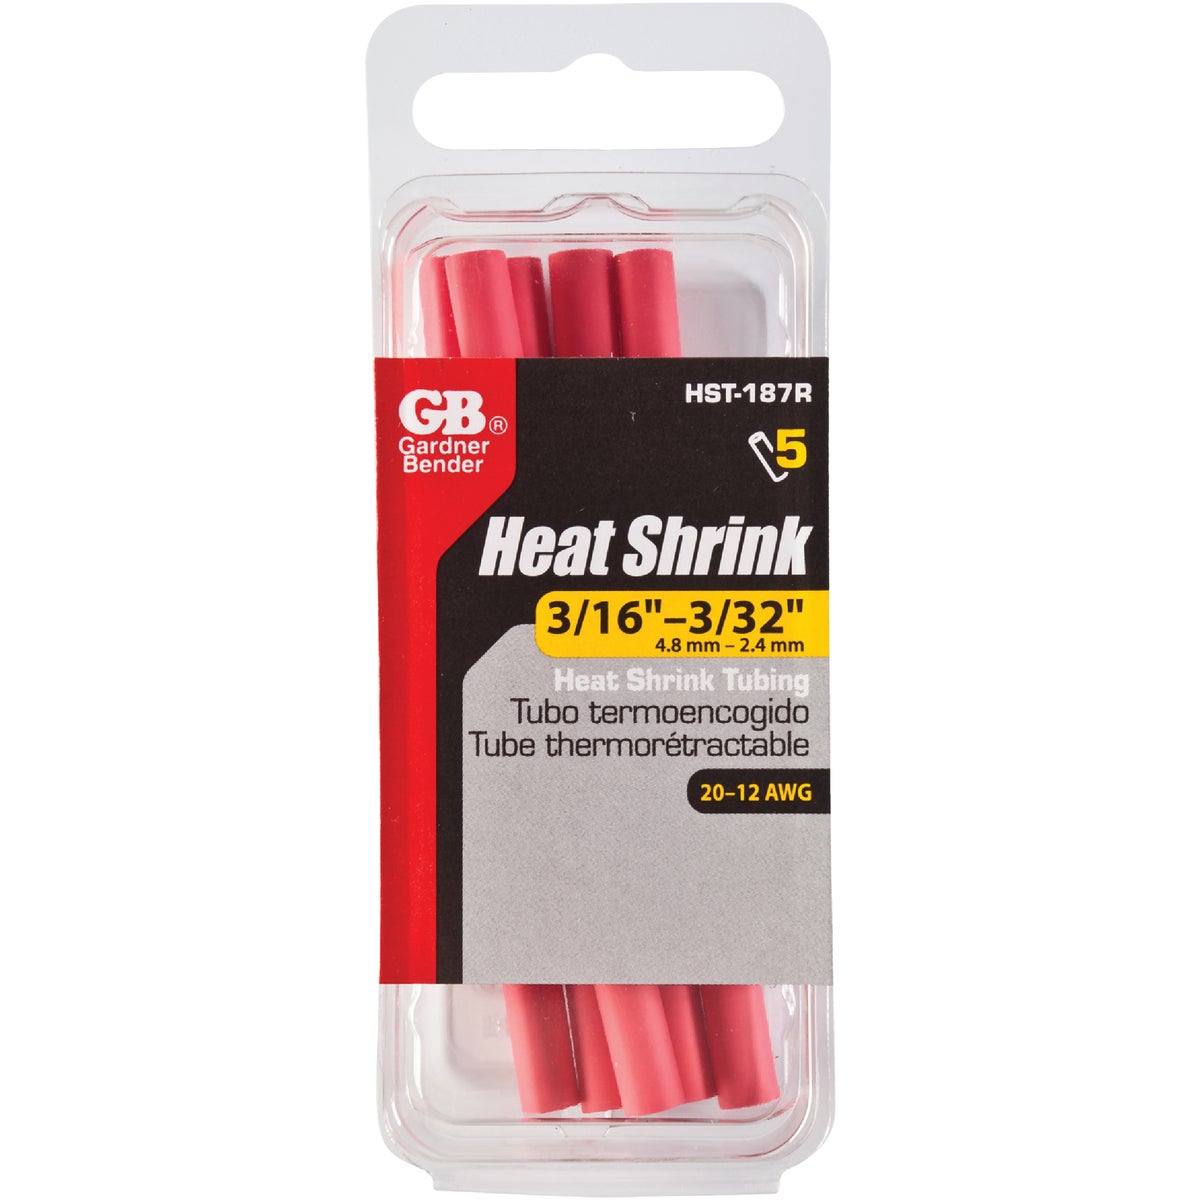 Item 501053, Thin-wall heat shrink tubing ideal for cable insulation, marking, and 